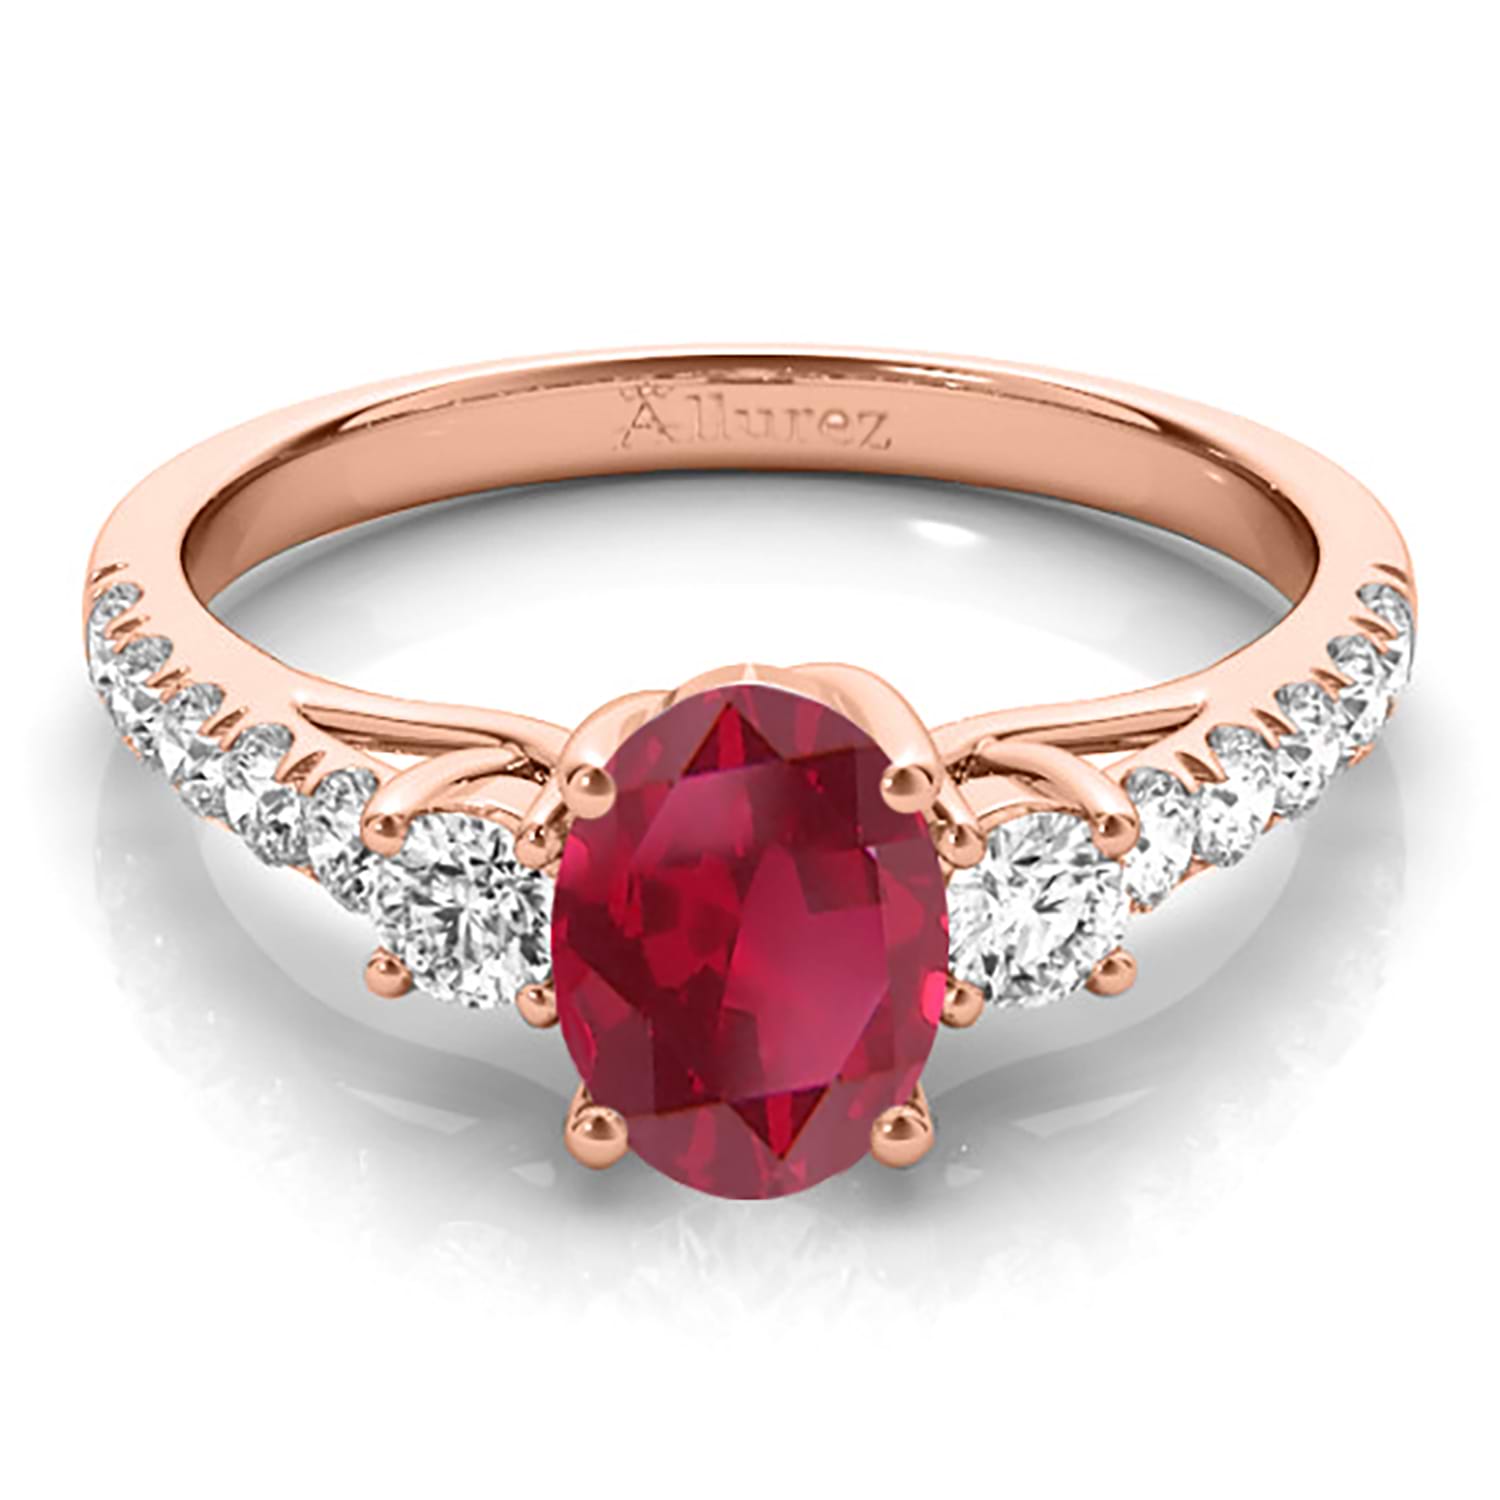 Oval Cut Ruby & Diamond Engagement Ring 14k Rose Gold (1.40ct)